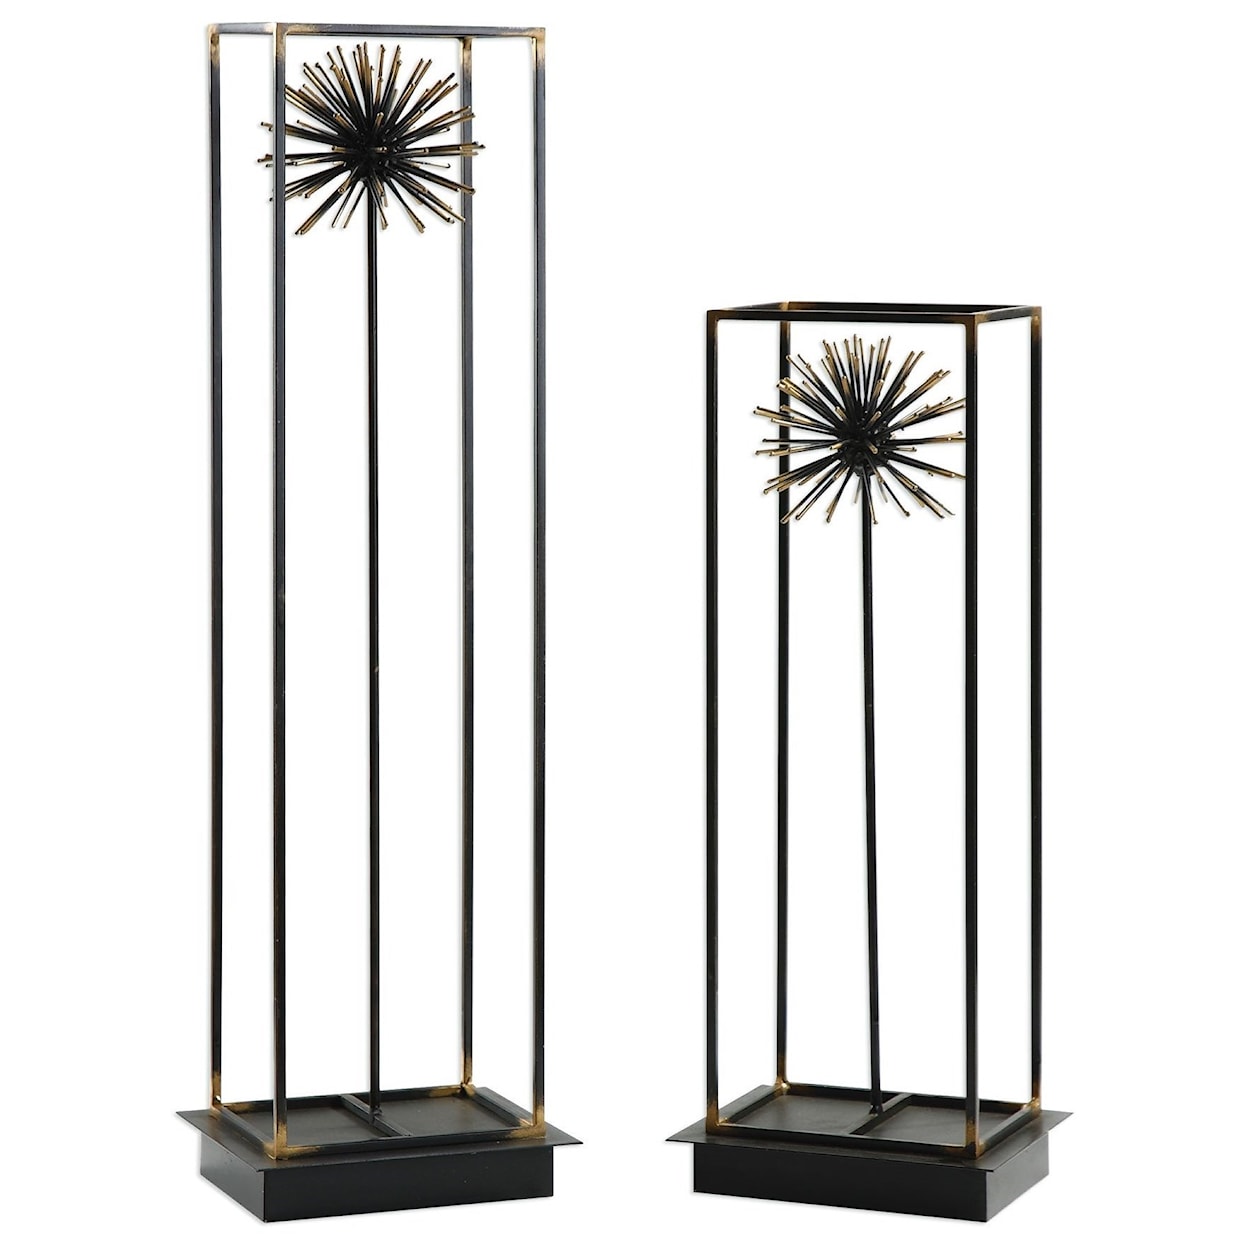 Uttermost Accessories - Statues and Figurines Flowering Dandelions Sculptures Set of 2